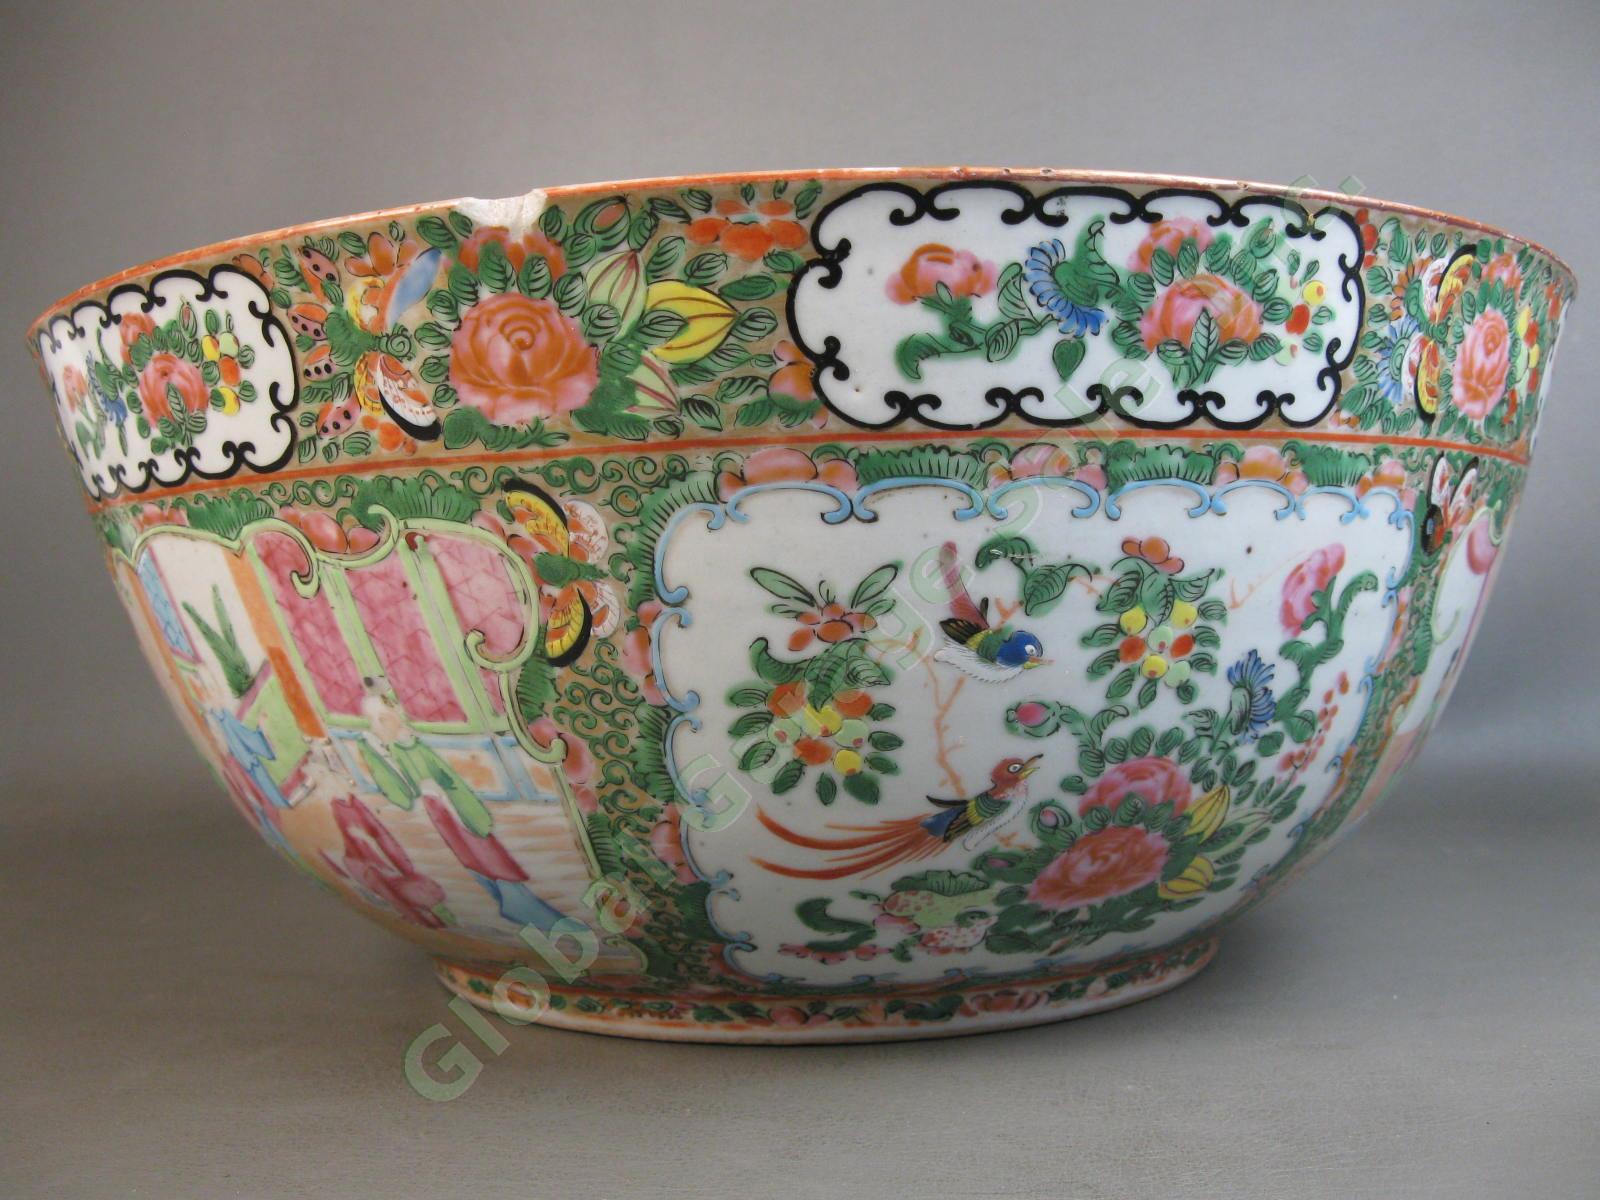 RARE Antique Chinese Early 19th C Large Famille Rose Medallion Punch Bowl 15" NR 3